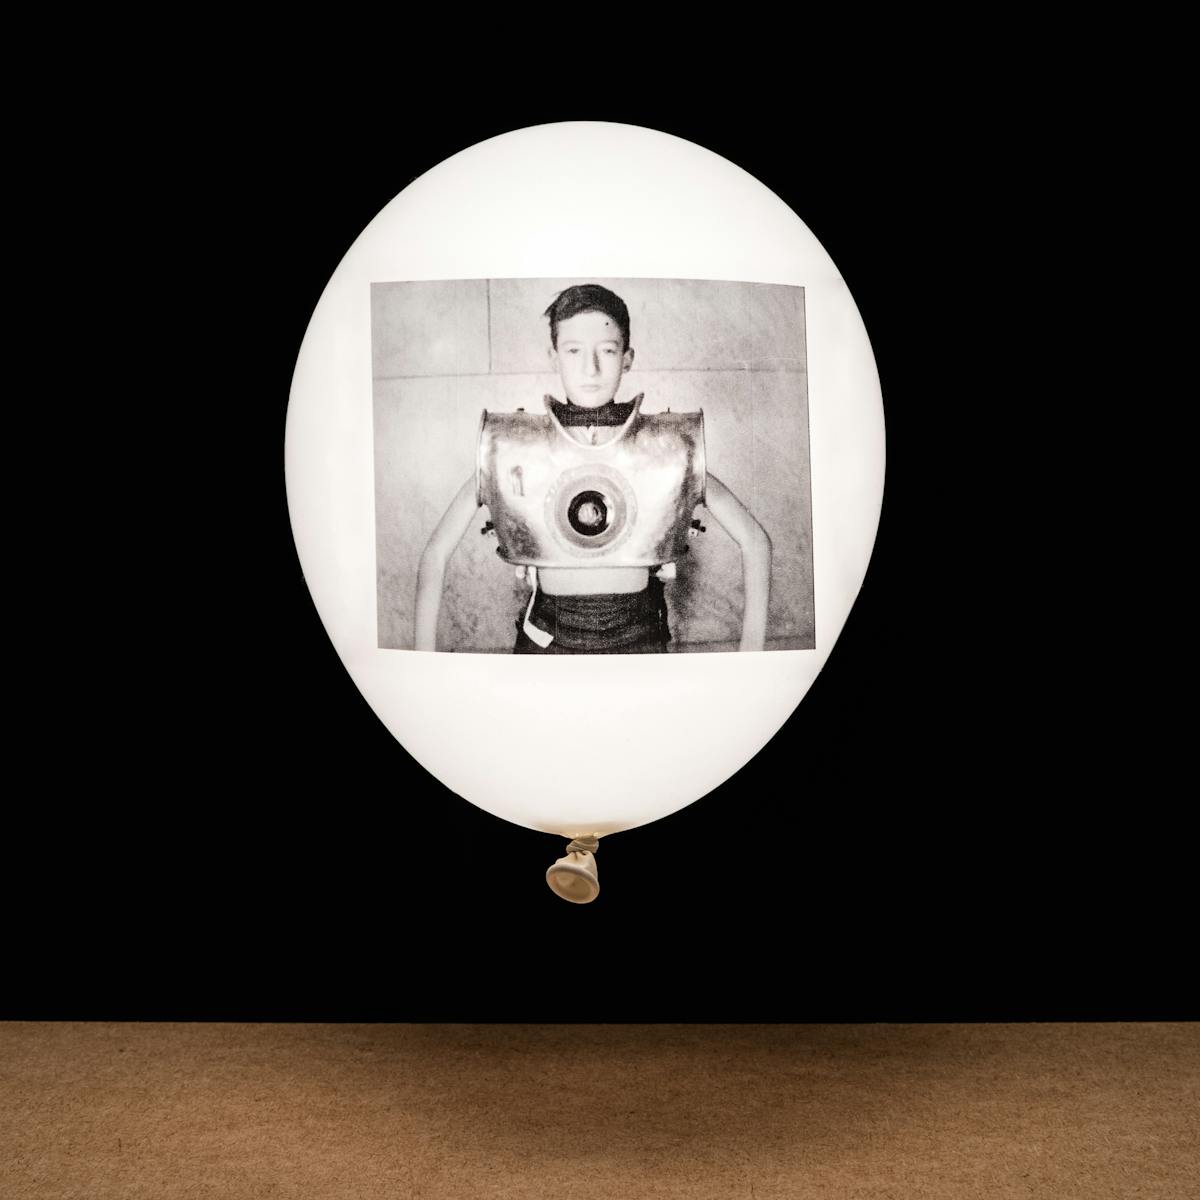 Photograph of a white inflated balloon against a black background, floating vertically above a wooden tabletop horizon line. The balloon looks like it is illuminated from within. On the side of the balloon is a rectangular, monochrome archive film still. The still shows a young boy facing the camera. His chest in encased in large metal contraption which is artificial ventilator.